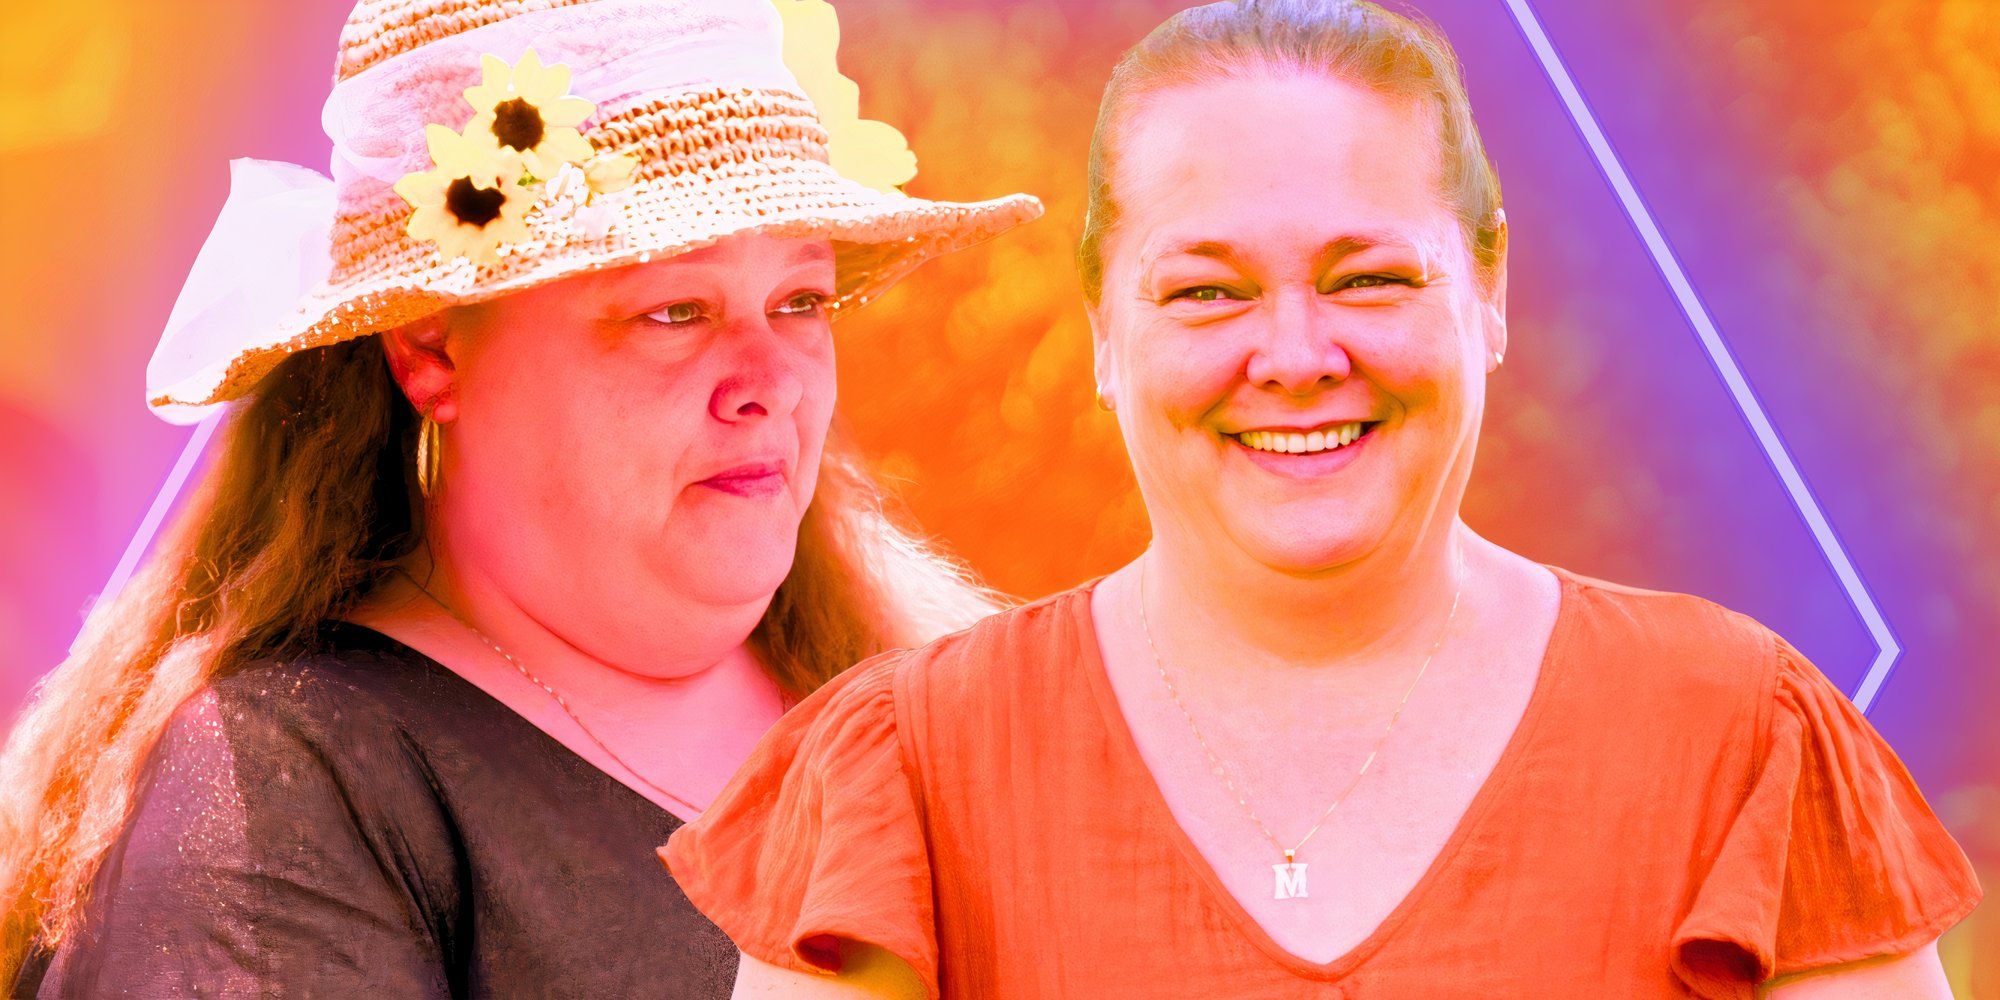  1000-Lb Sisters Misty Slaton Wentworth montage of her in hat and smiling